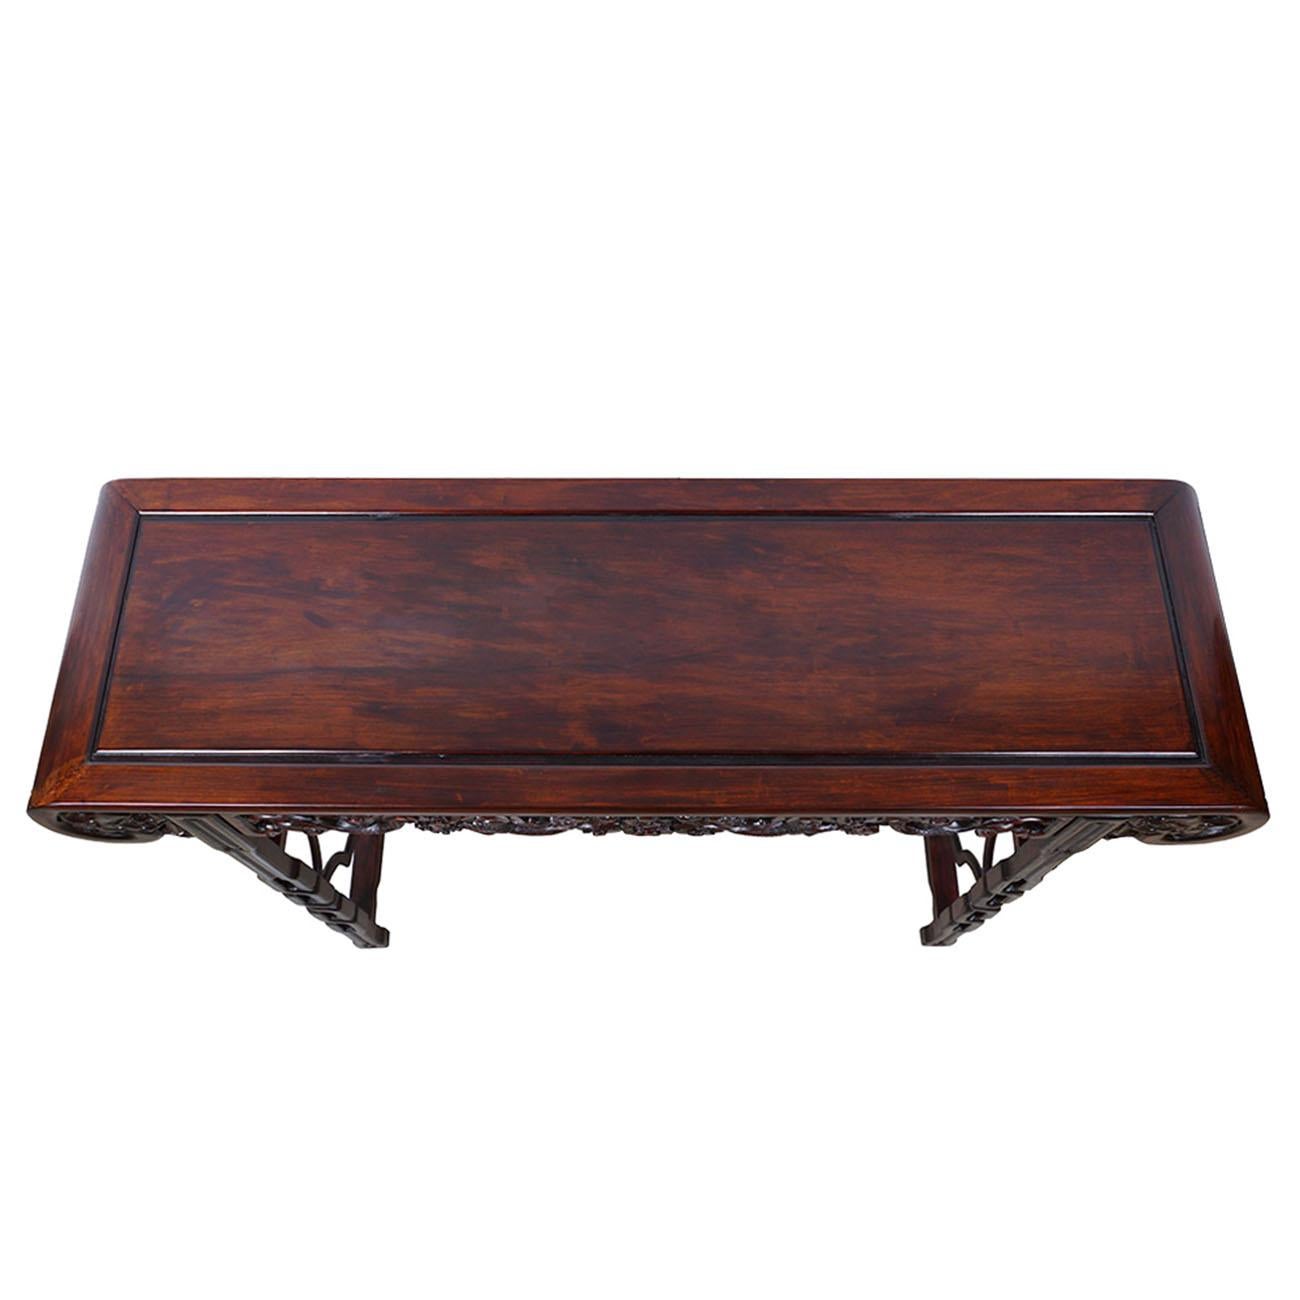 Antique Chinese Carved Rosewood Altar Table, Sofa Table, Entry Console 1